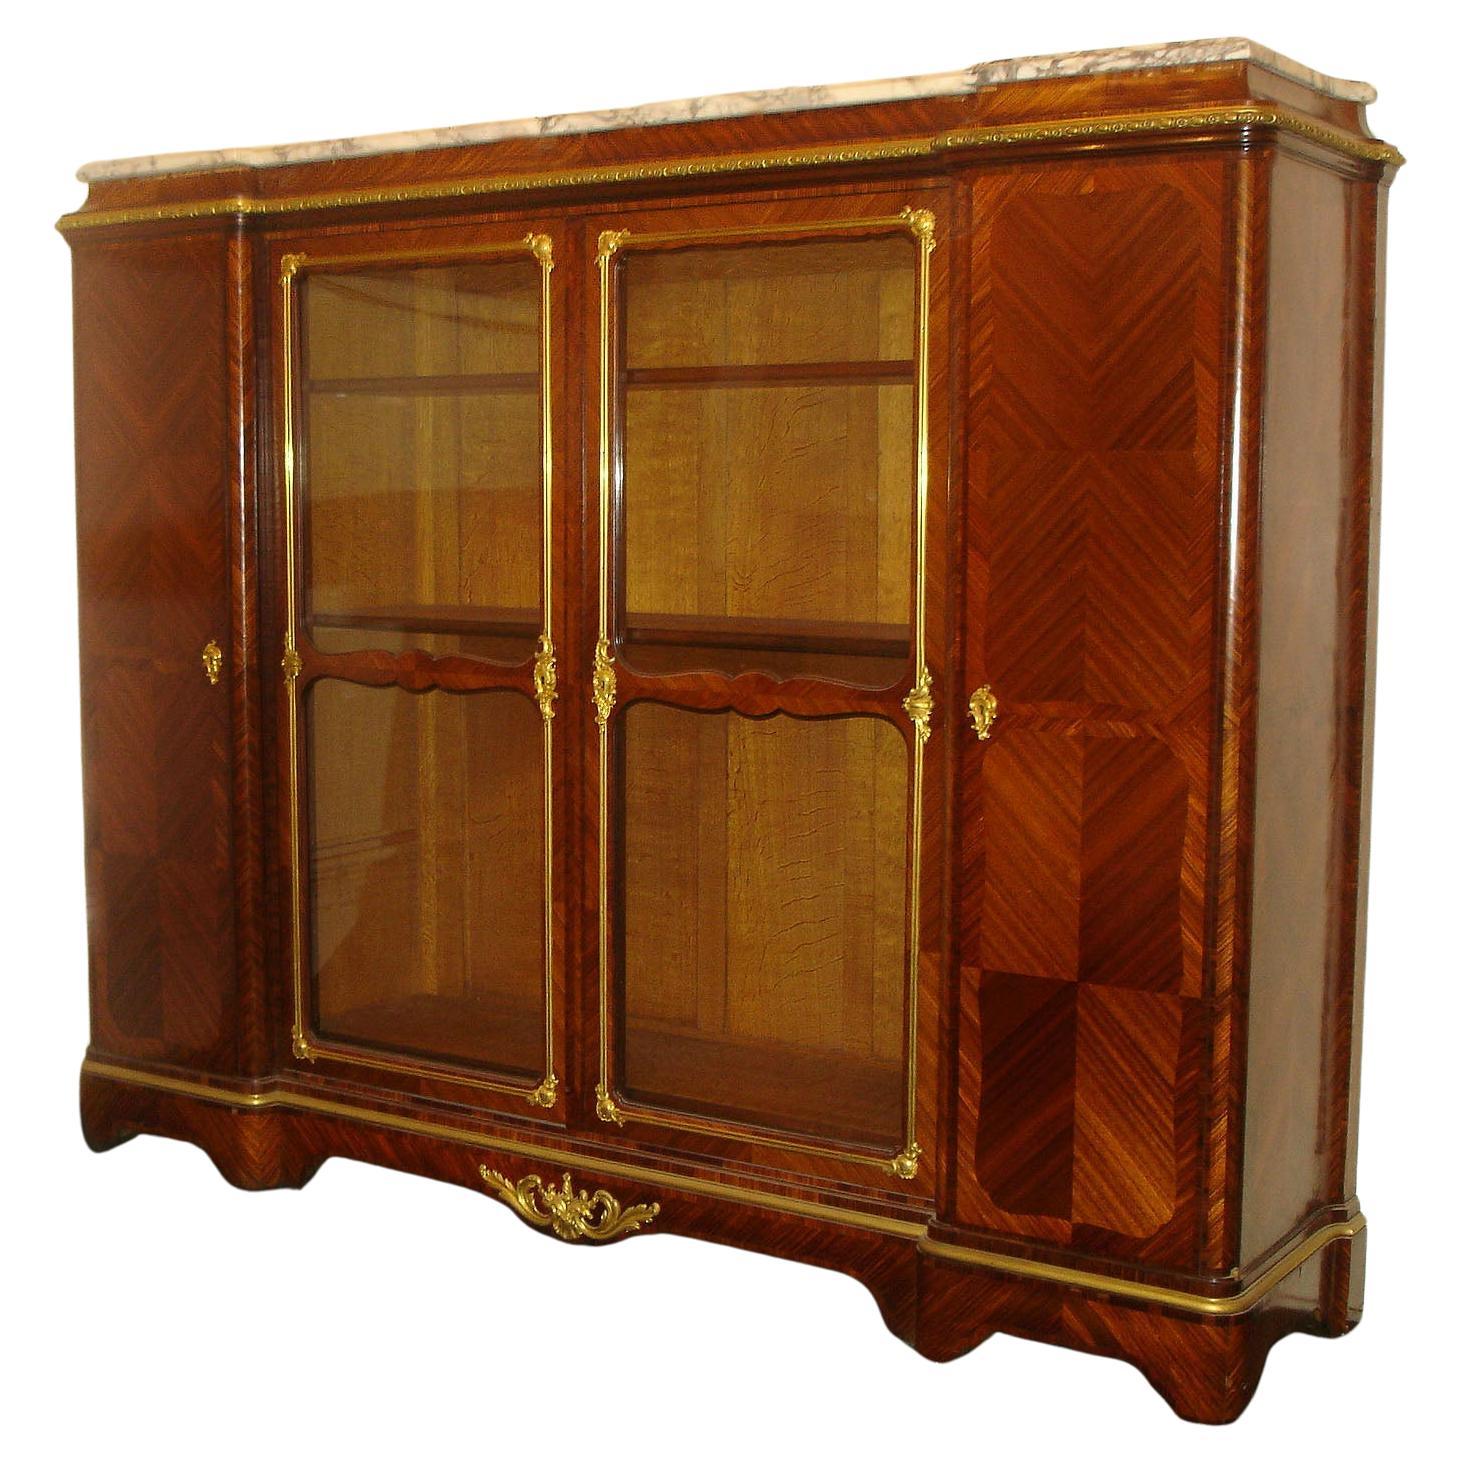 Fine and Grand 19th Century Gilt Bronze Mounted Vitrine/Bookcase By Paul Sormani For Sale